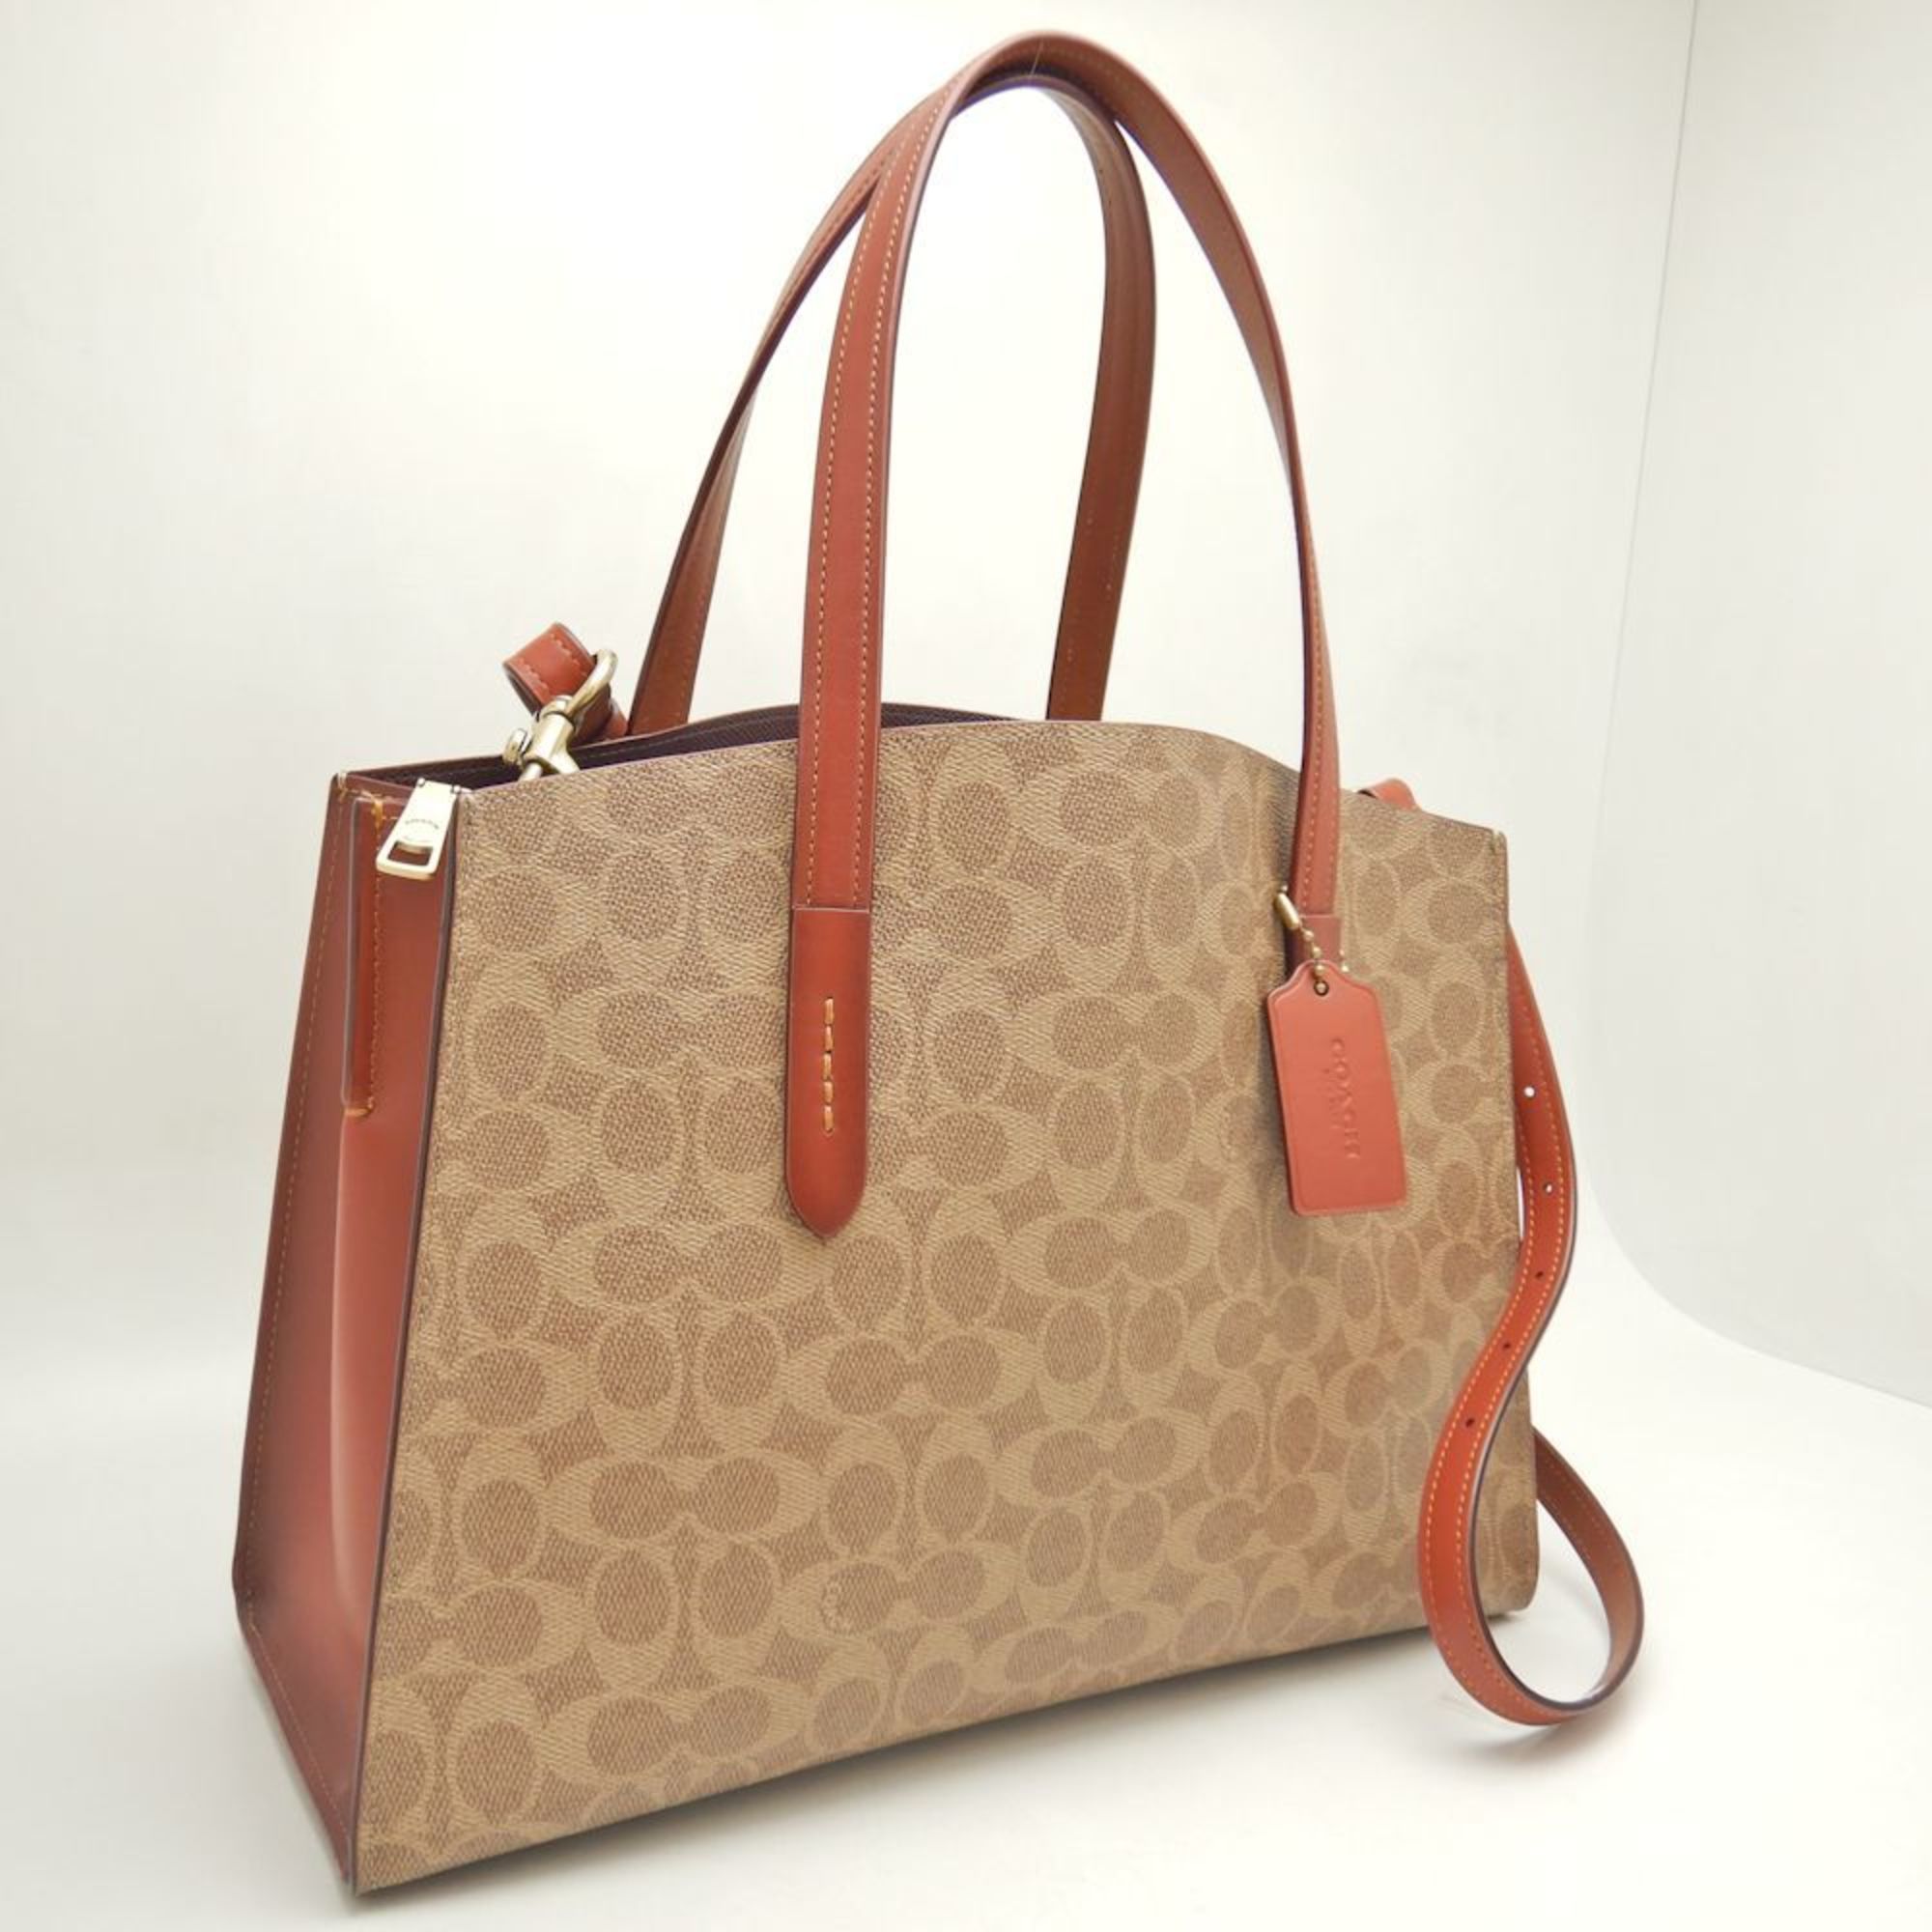 COACH Charlie Carryall 31210 Tote Bag x Leather Beige Brown 251824